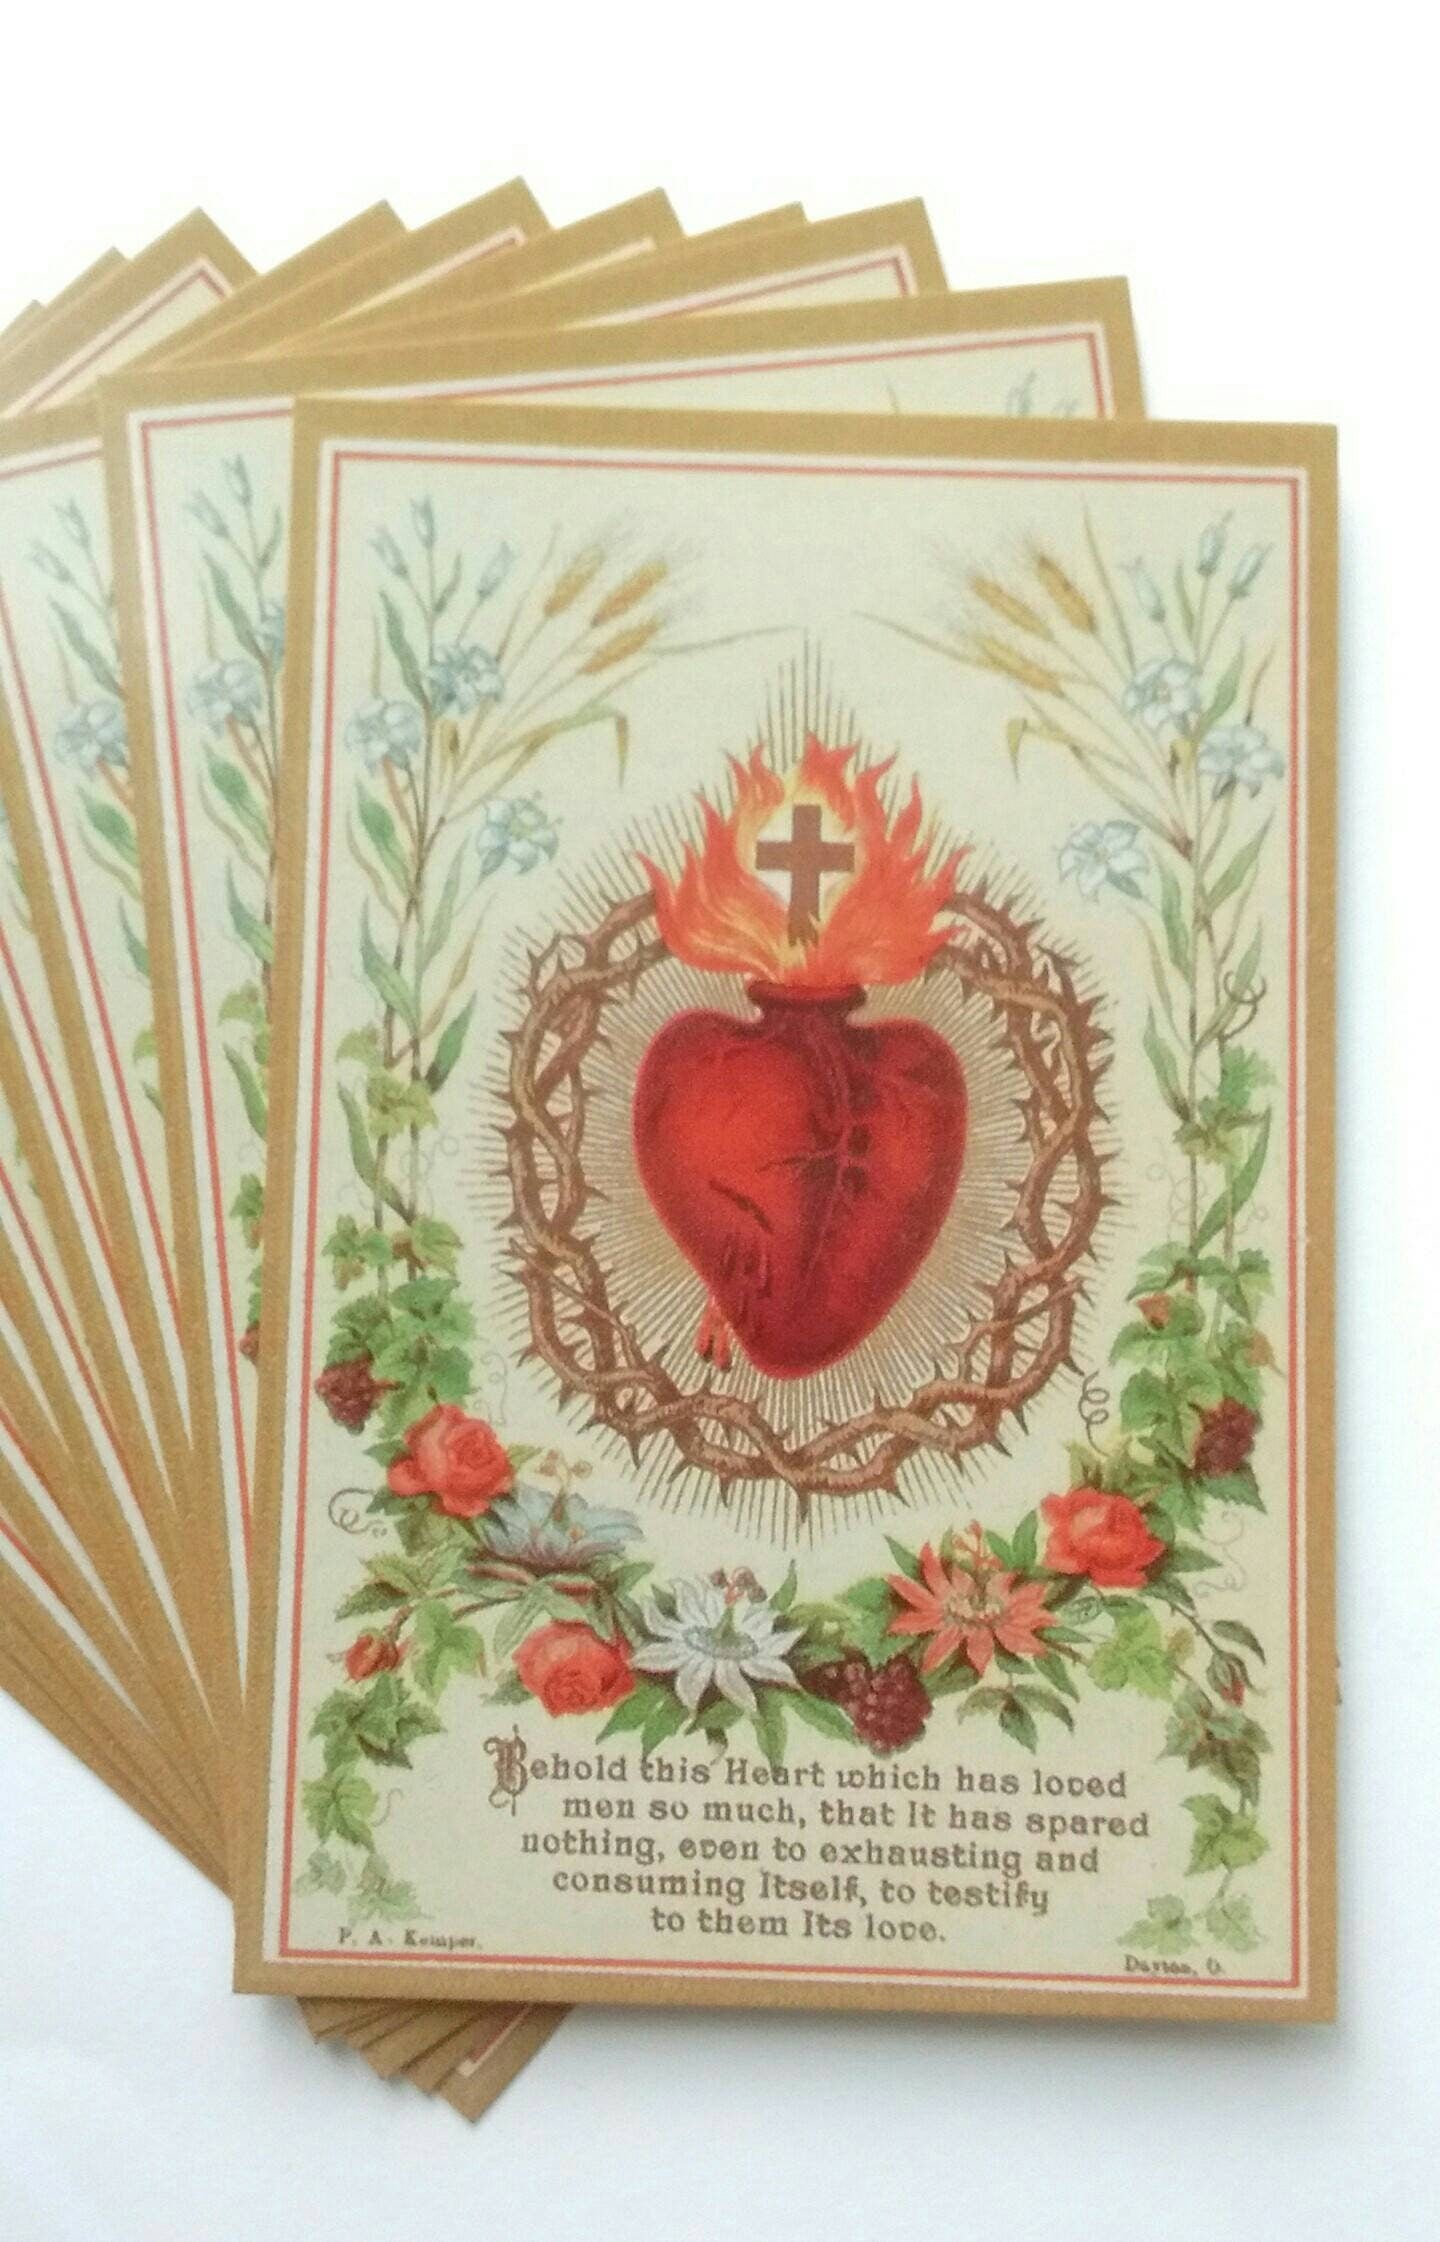 Sacred Heart of Jesus Postcard / 4x6 Holy Card – pack of 3, 10, or 100 – based on a Vintage Holy Card – Victorian Catholic Art